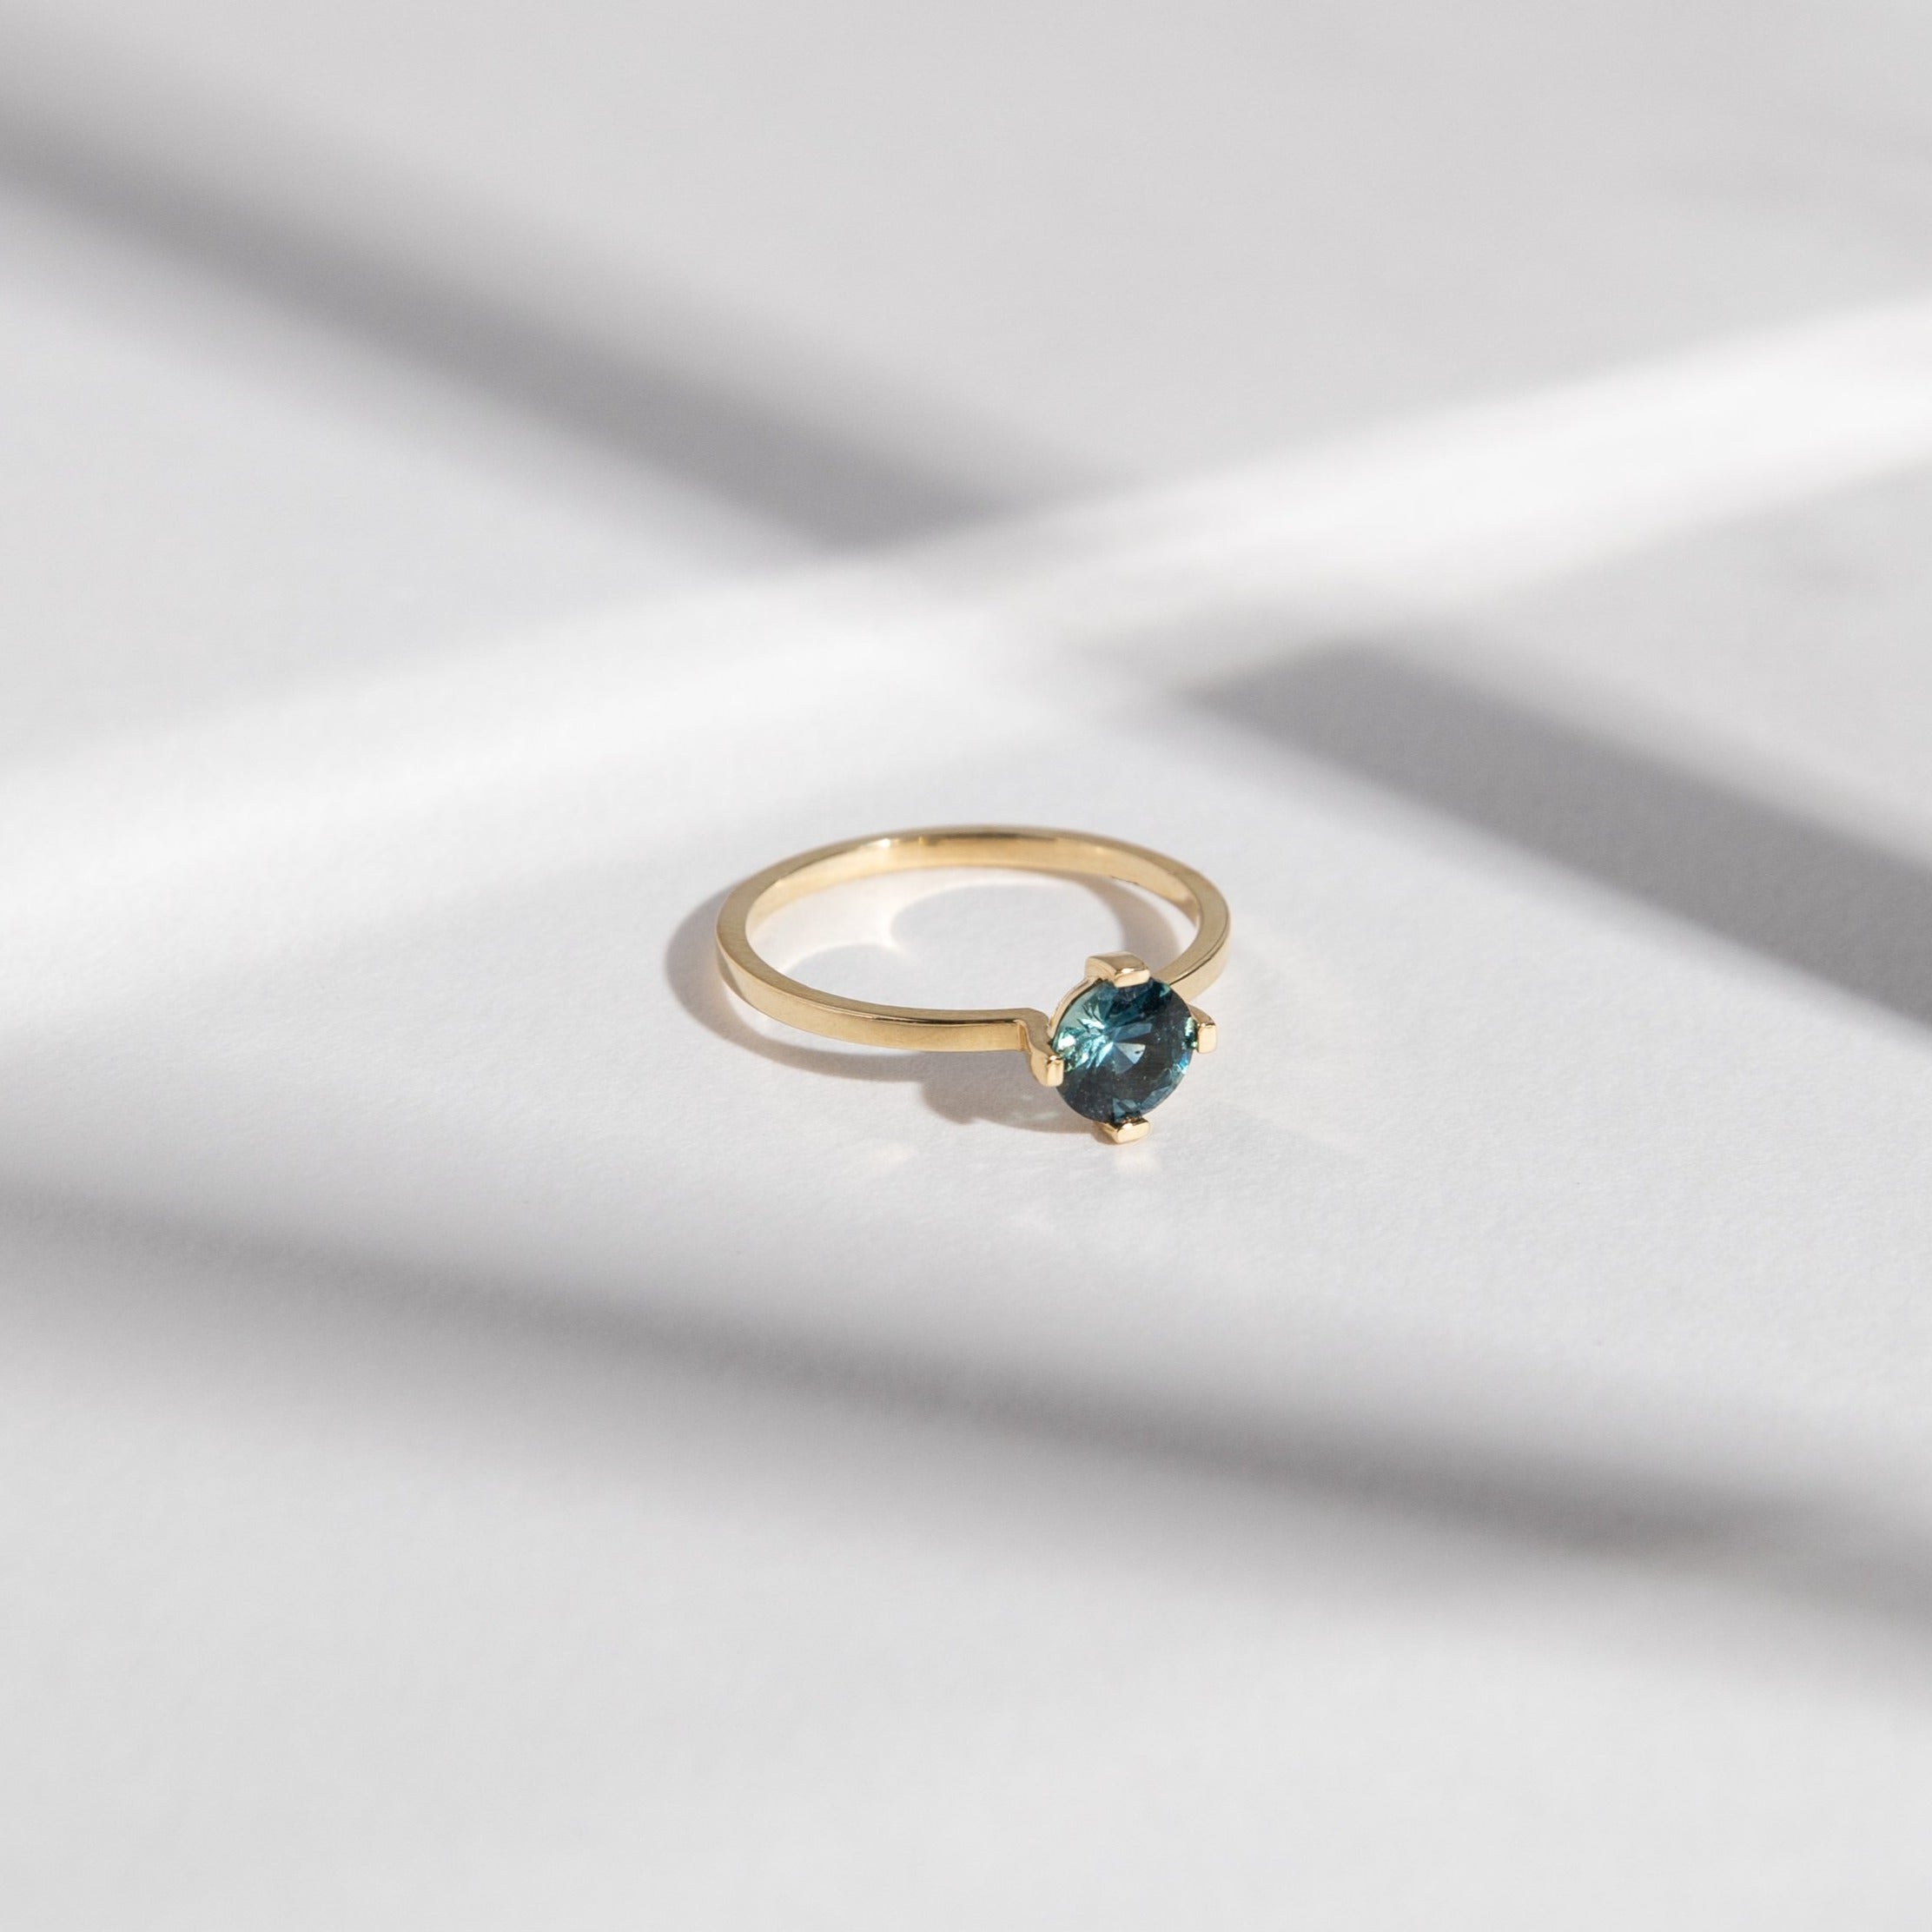 Ema Thin Ring in 14k Gold set with a 0.8ct medium round brilliant cut denim color sapphire By SHW Fine Jewelry NYC